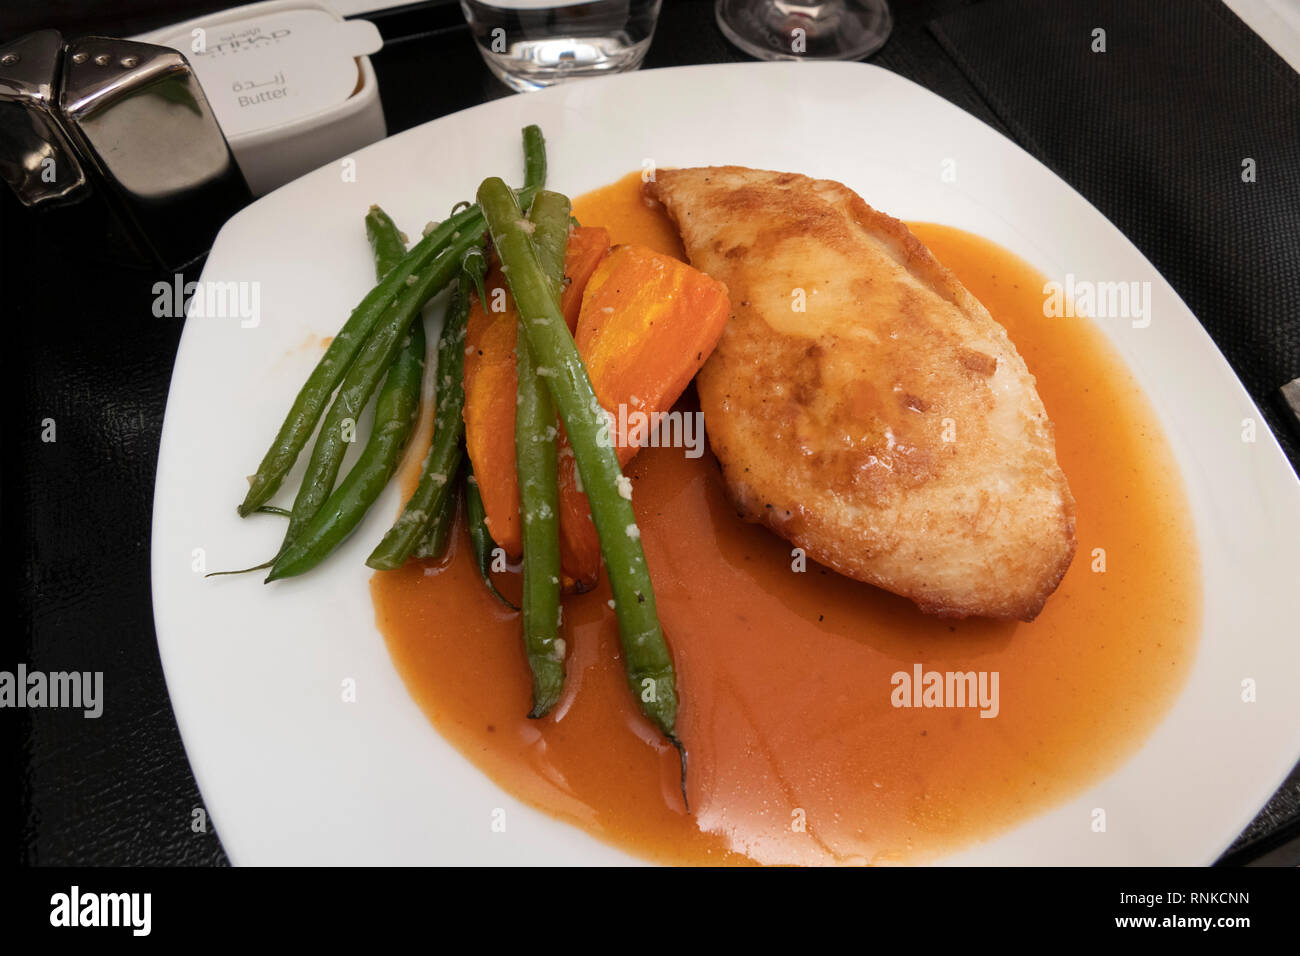 Air Travel, Etihad Airways Boeing 777-300, Business Class in flight meal,, low carbohydrate lunch, grilled chicken with carrot and green beans Stock Photo